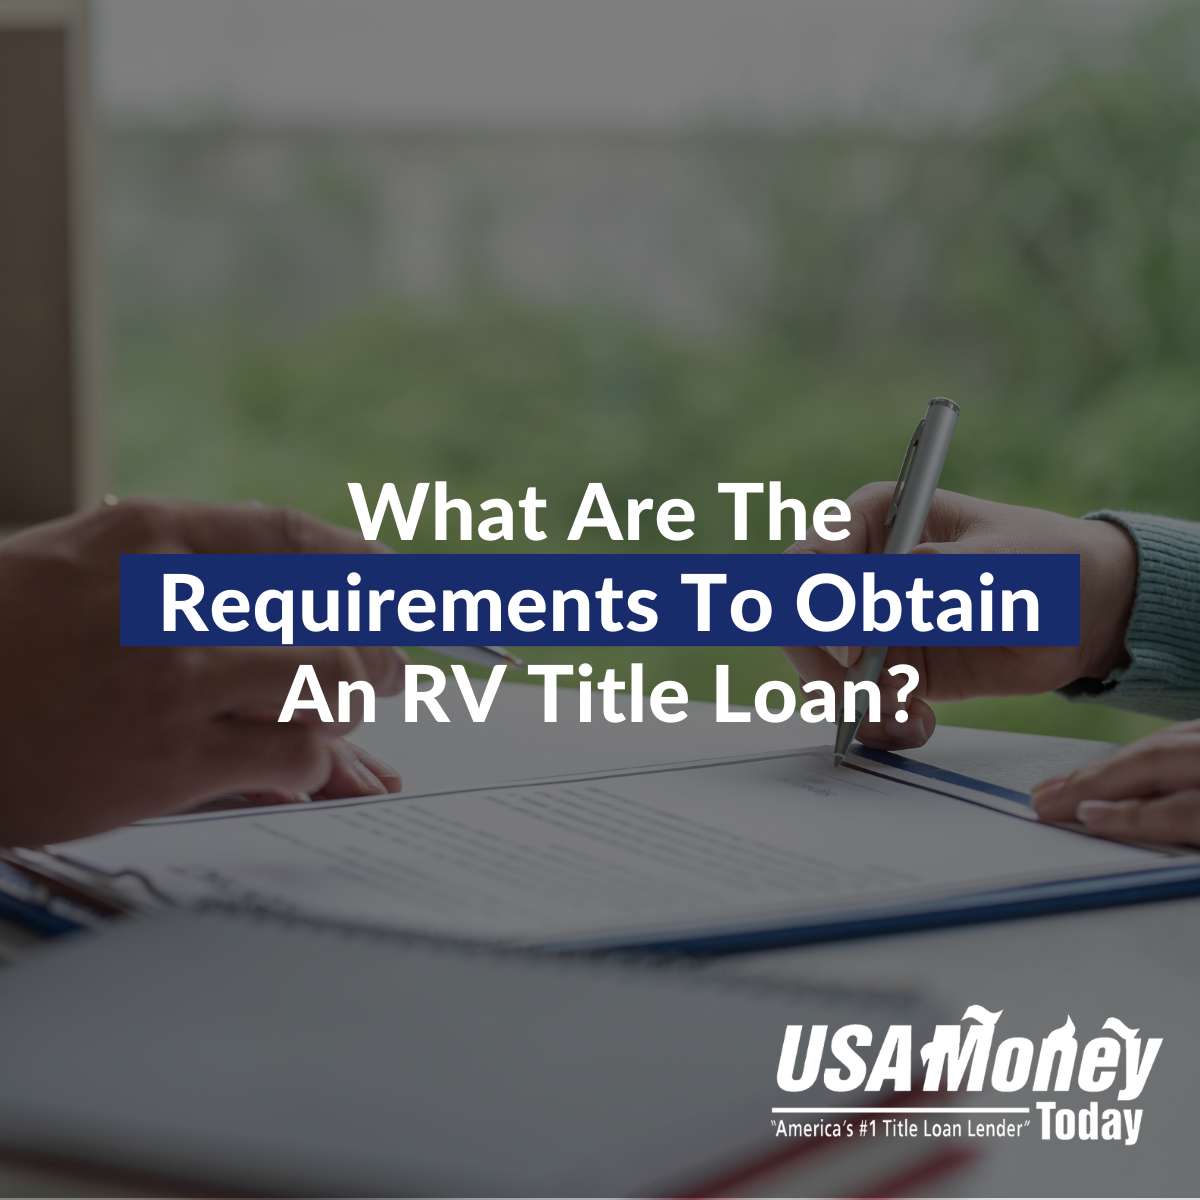 What Are The Requirements To Obtain An RV Title Loan?